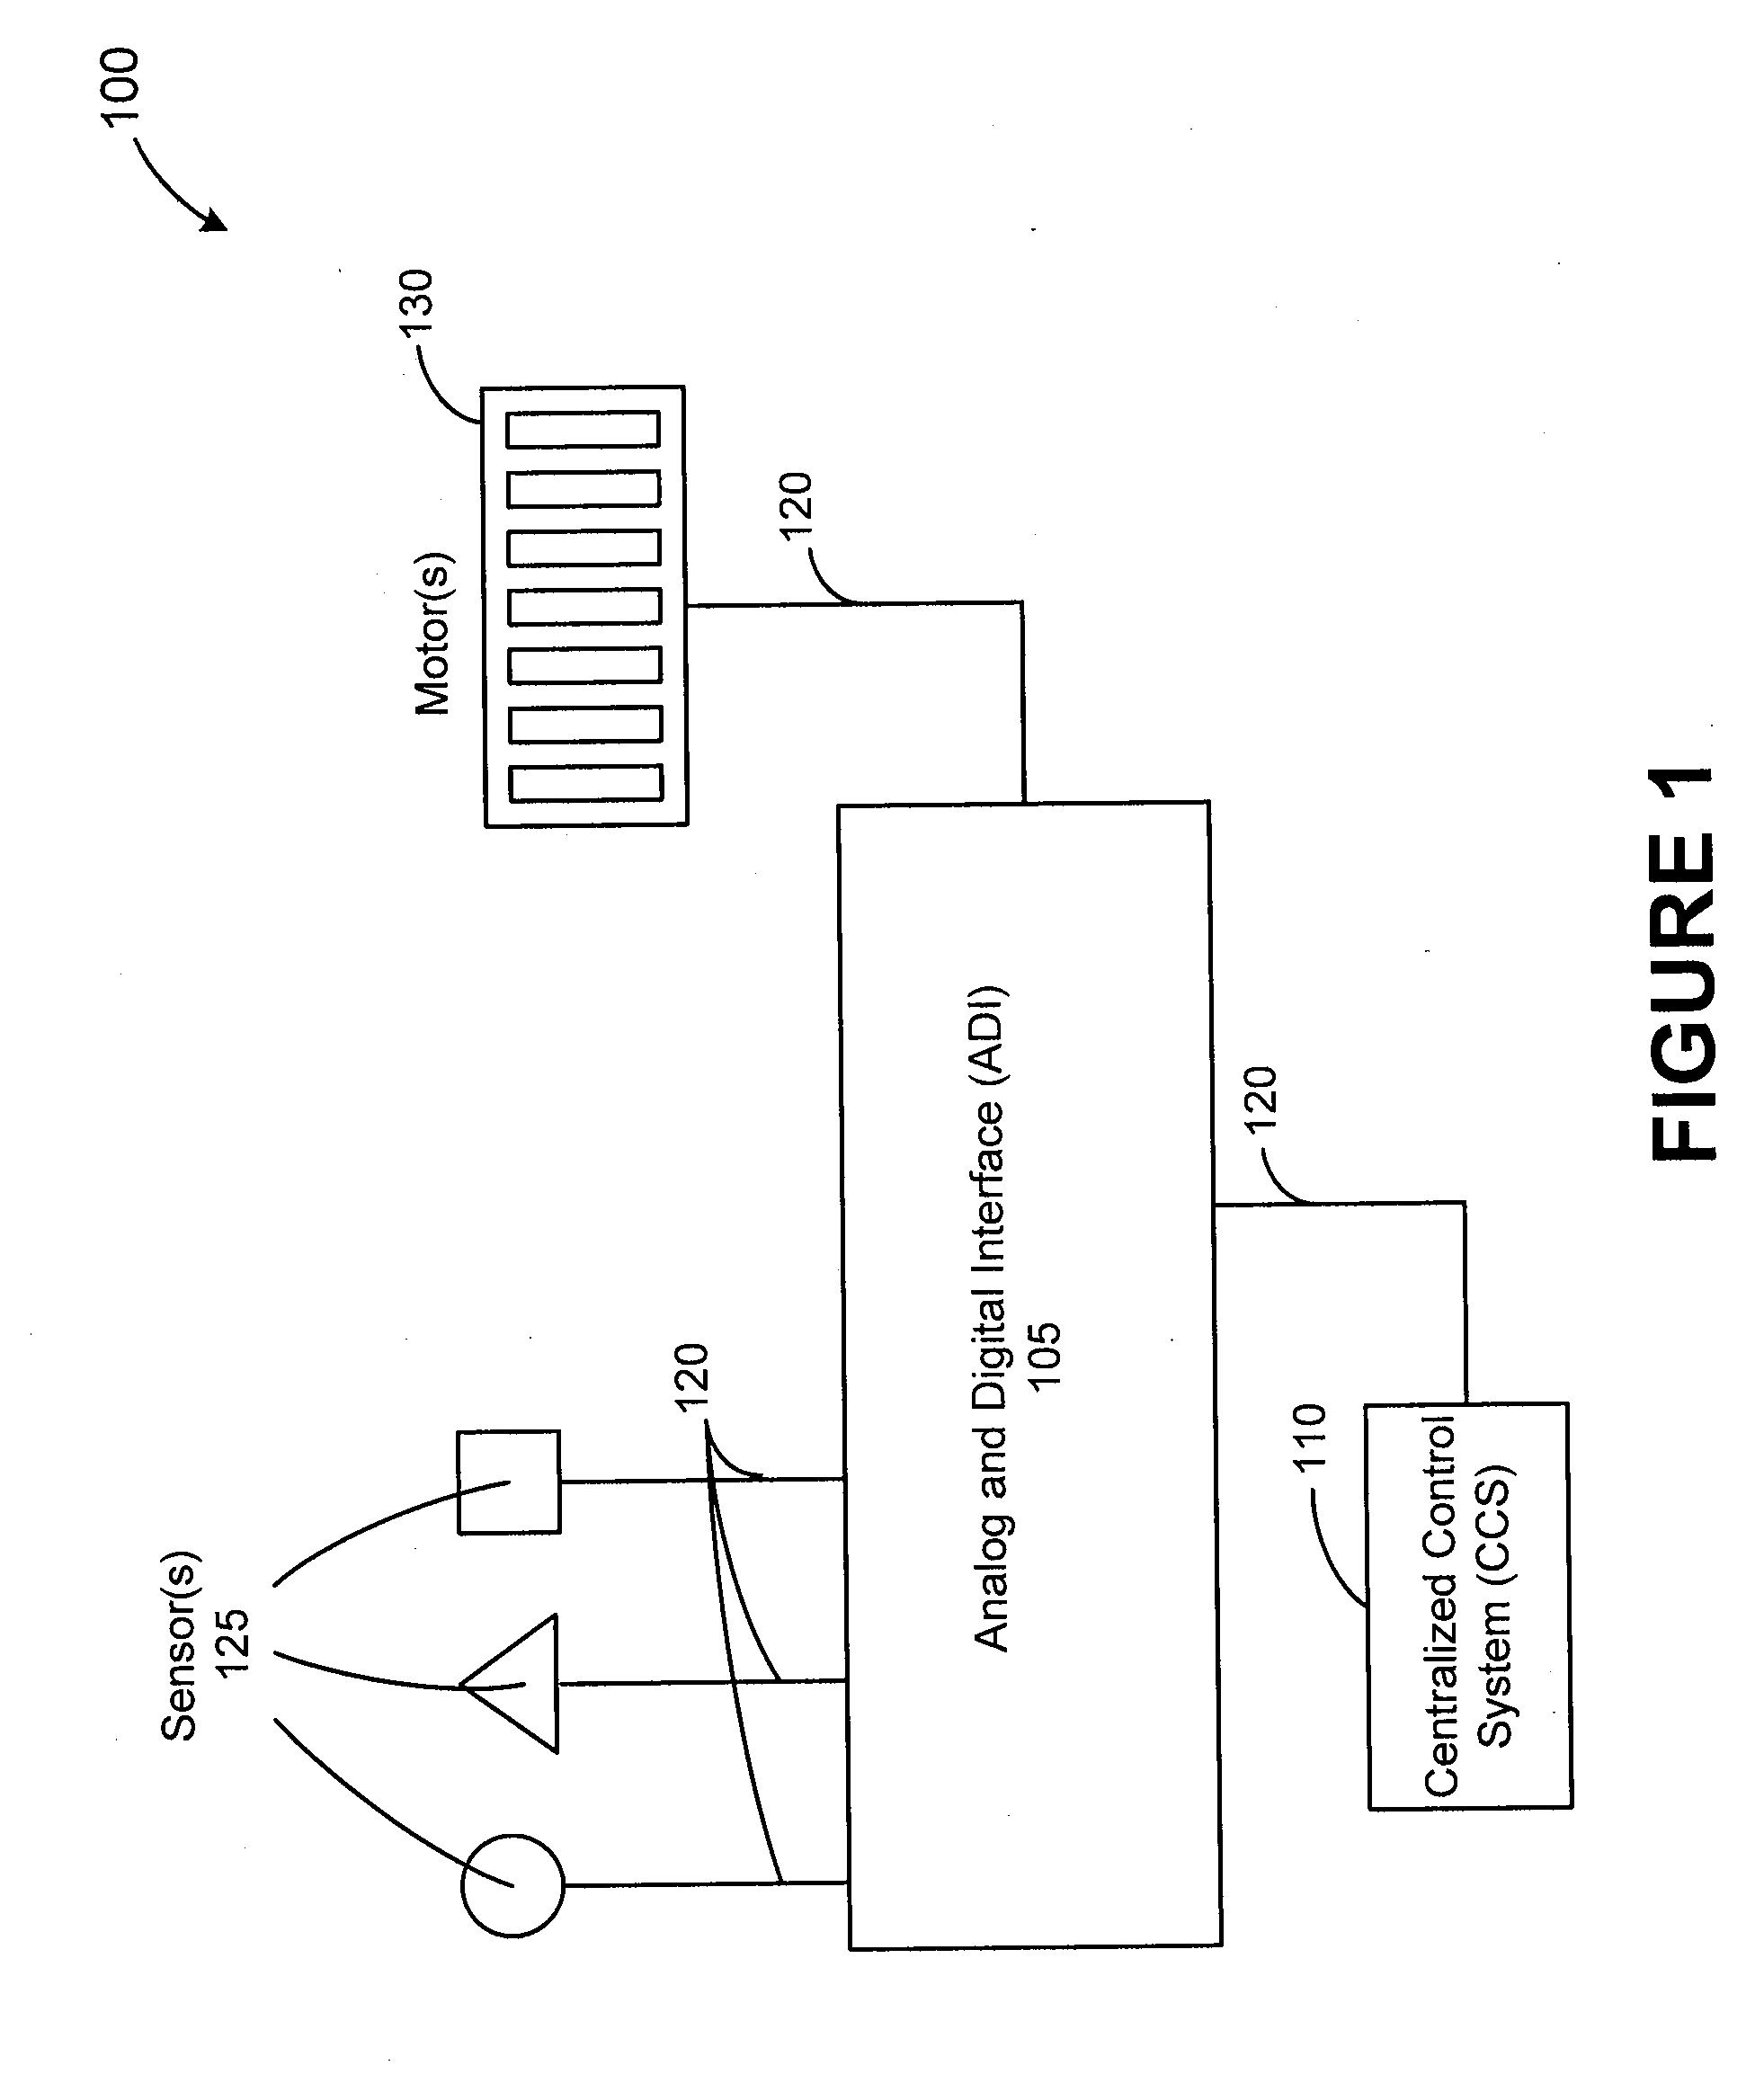 Automated shade control relectance module